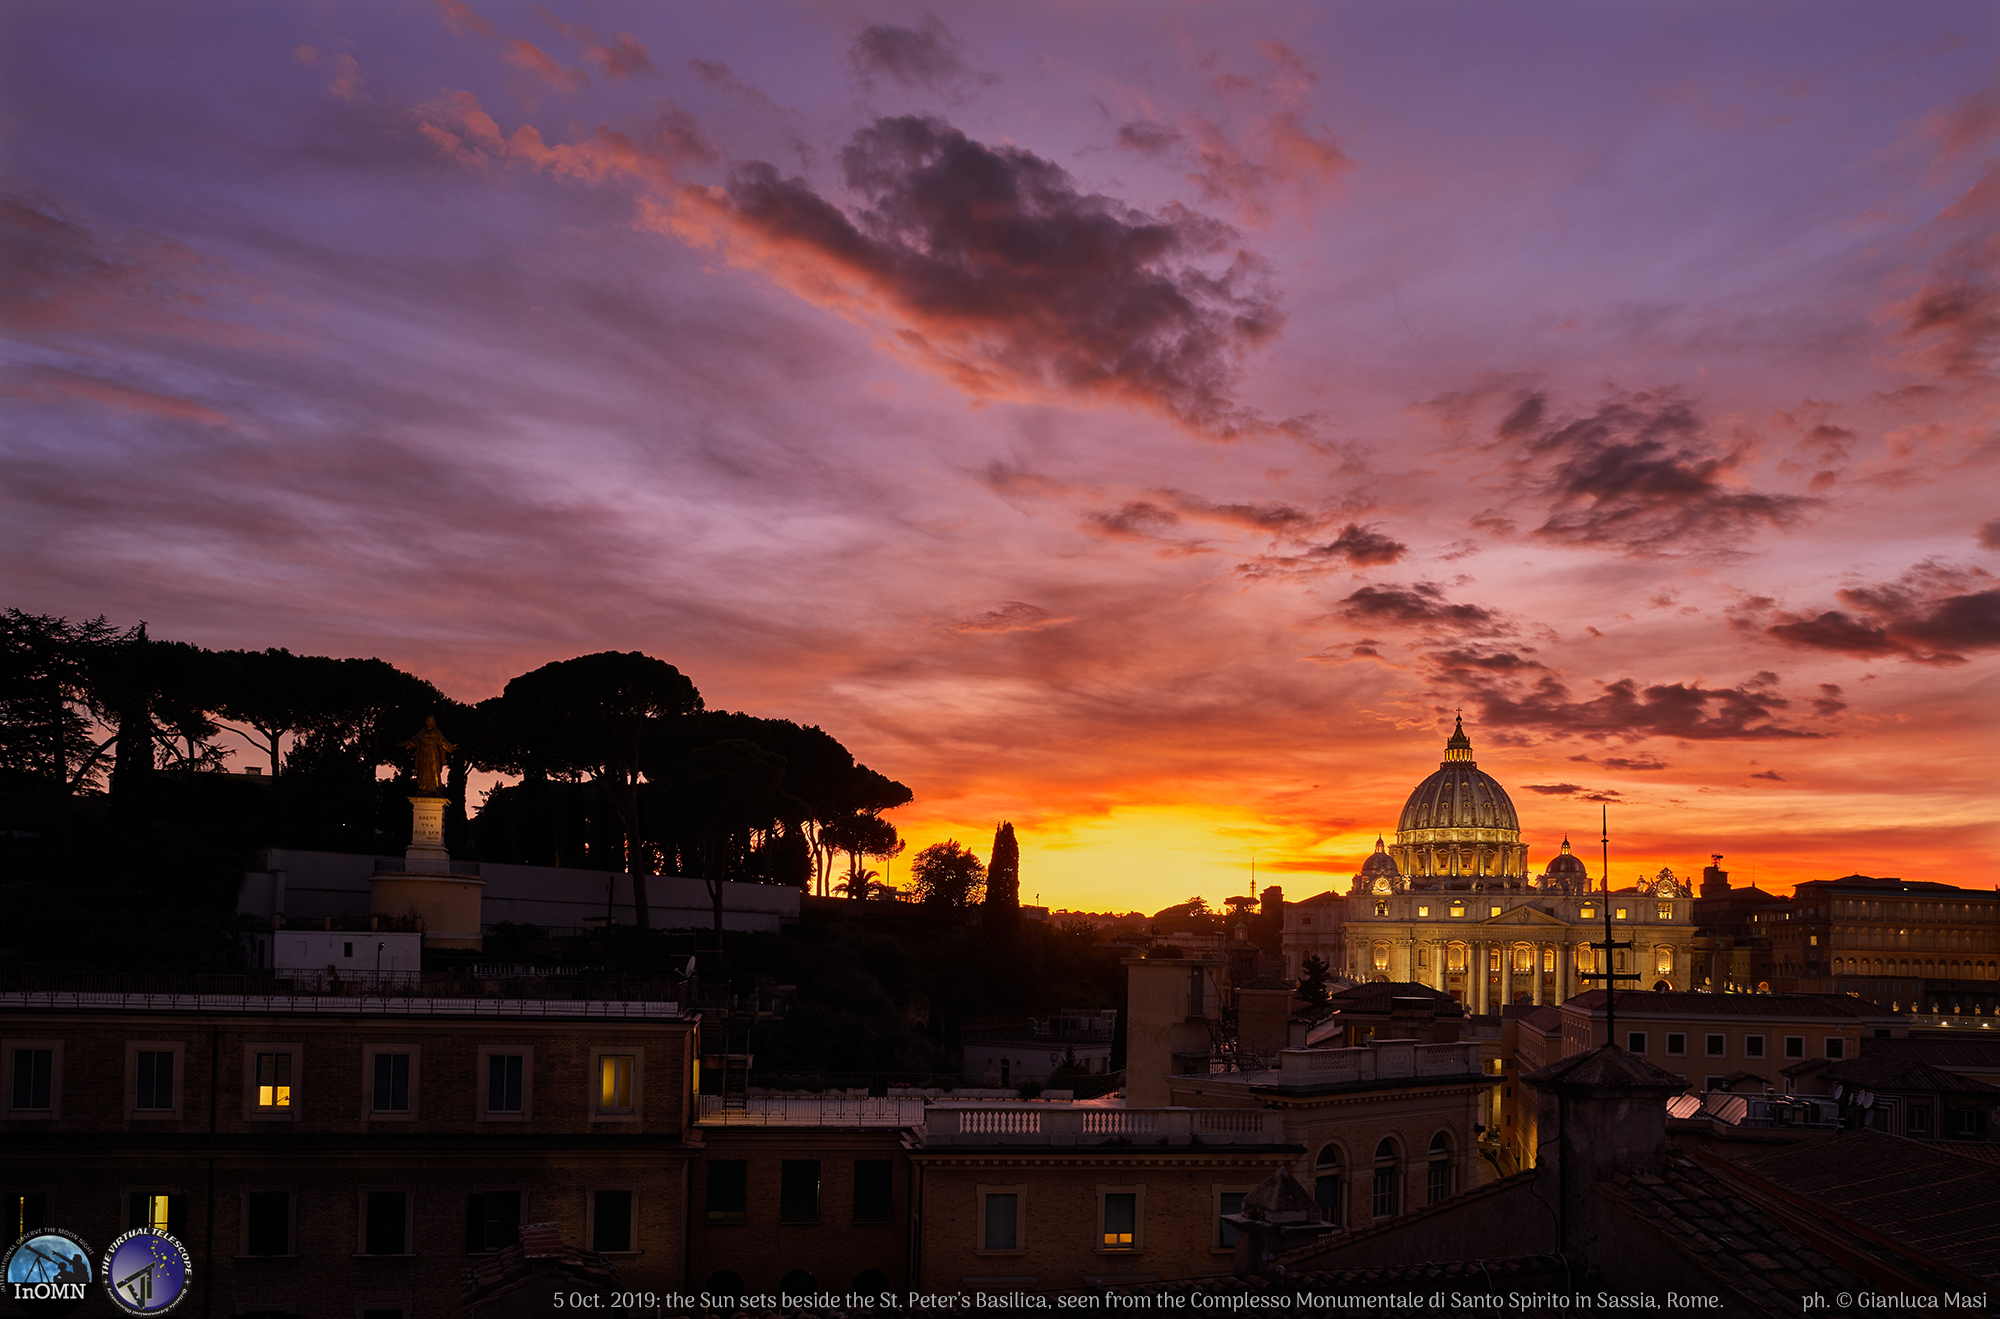 The sunset, as seen from the "Santo Spirito"'s tower: St. Peter's Basilica dominates the western sky, with unbelievable colors all around.